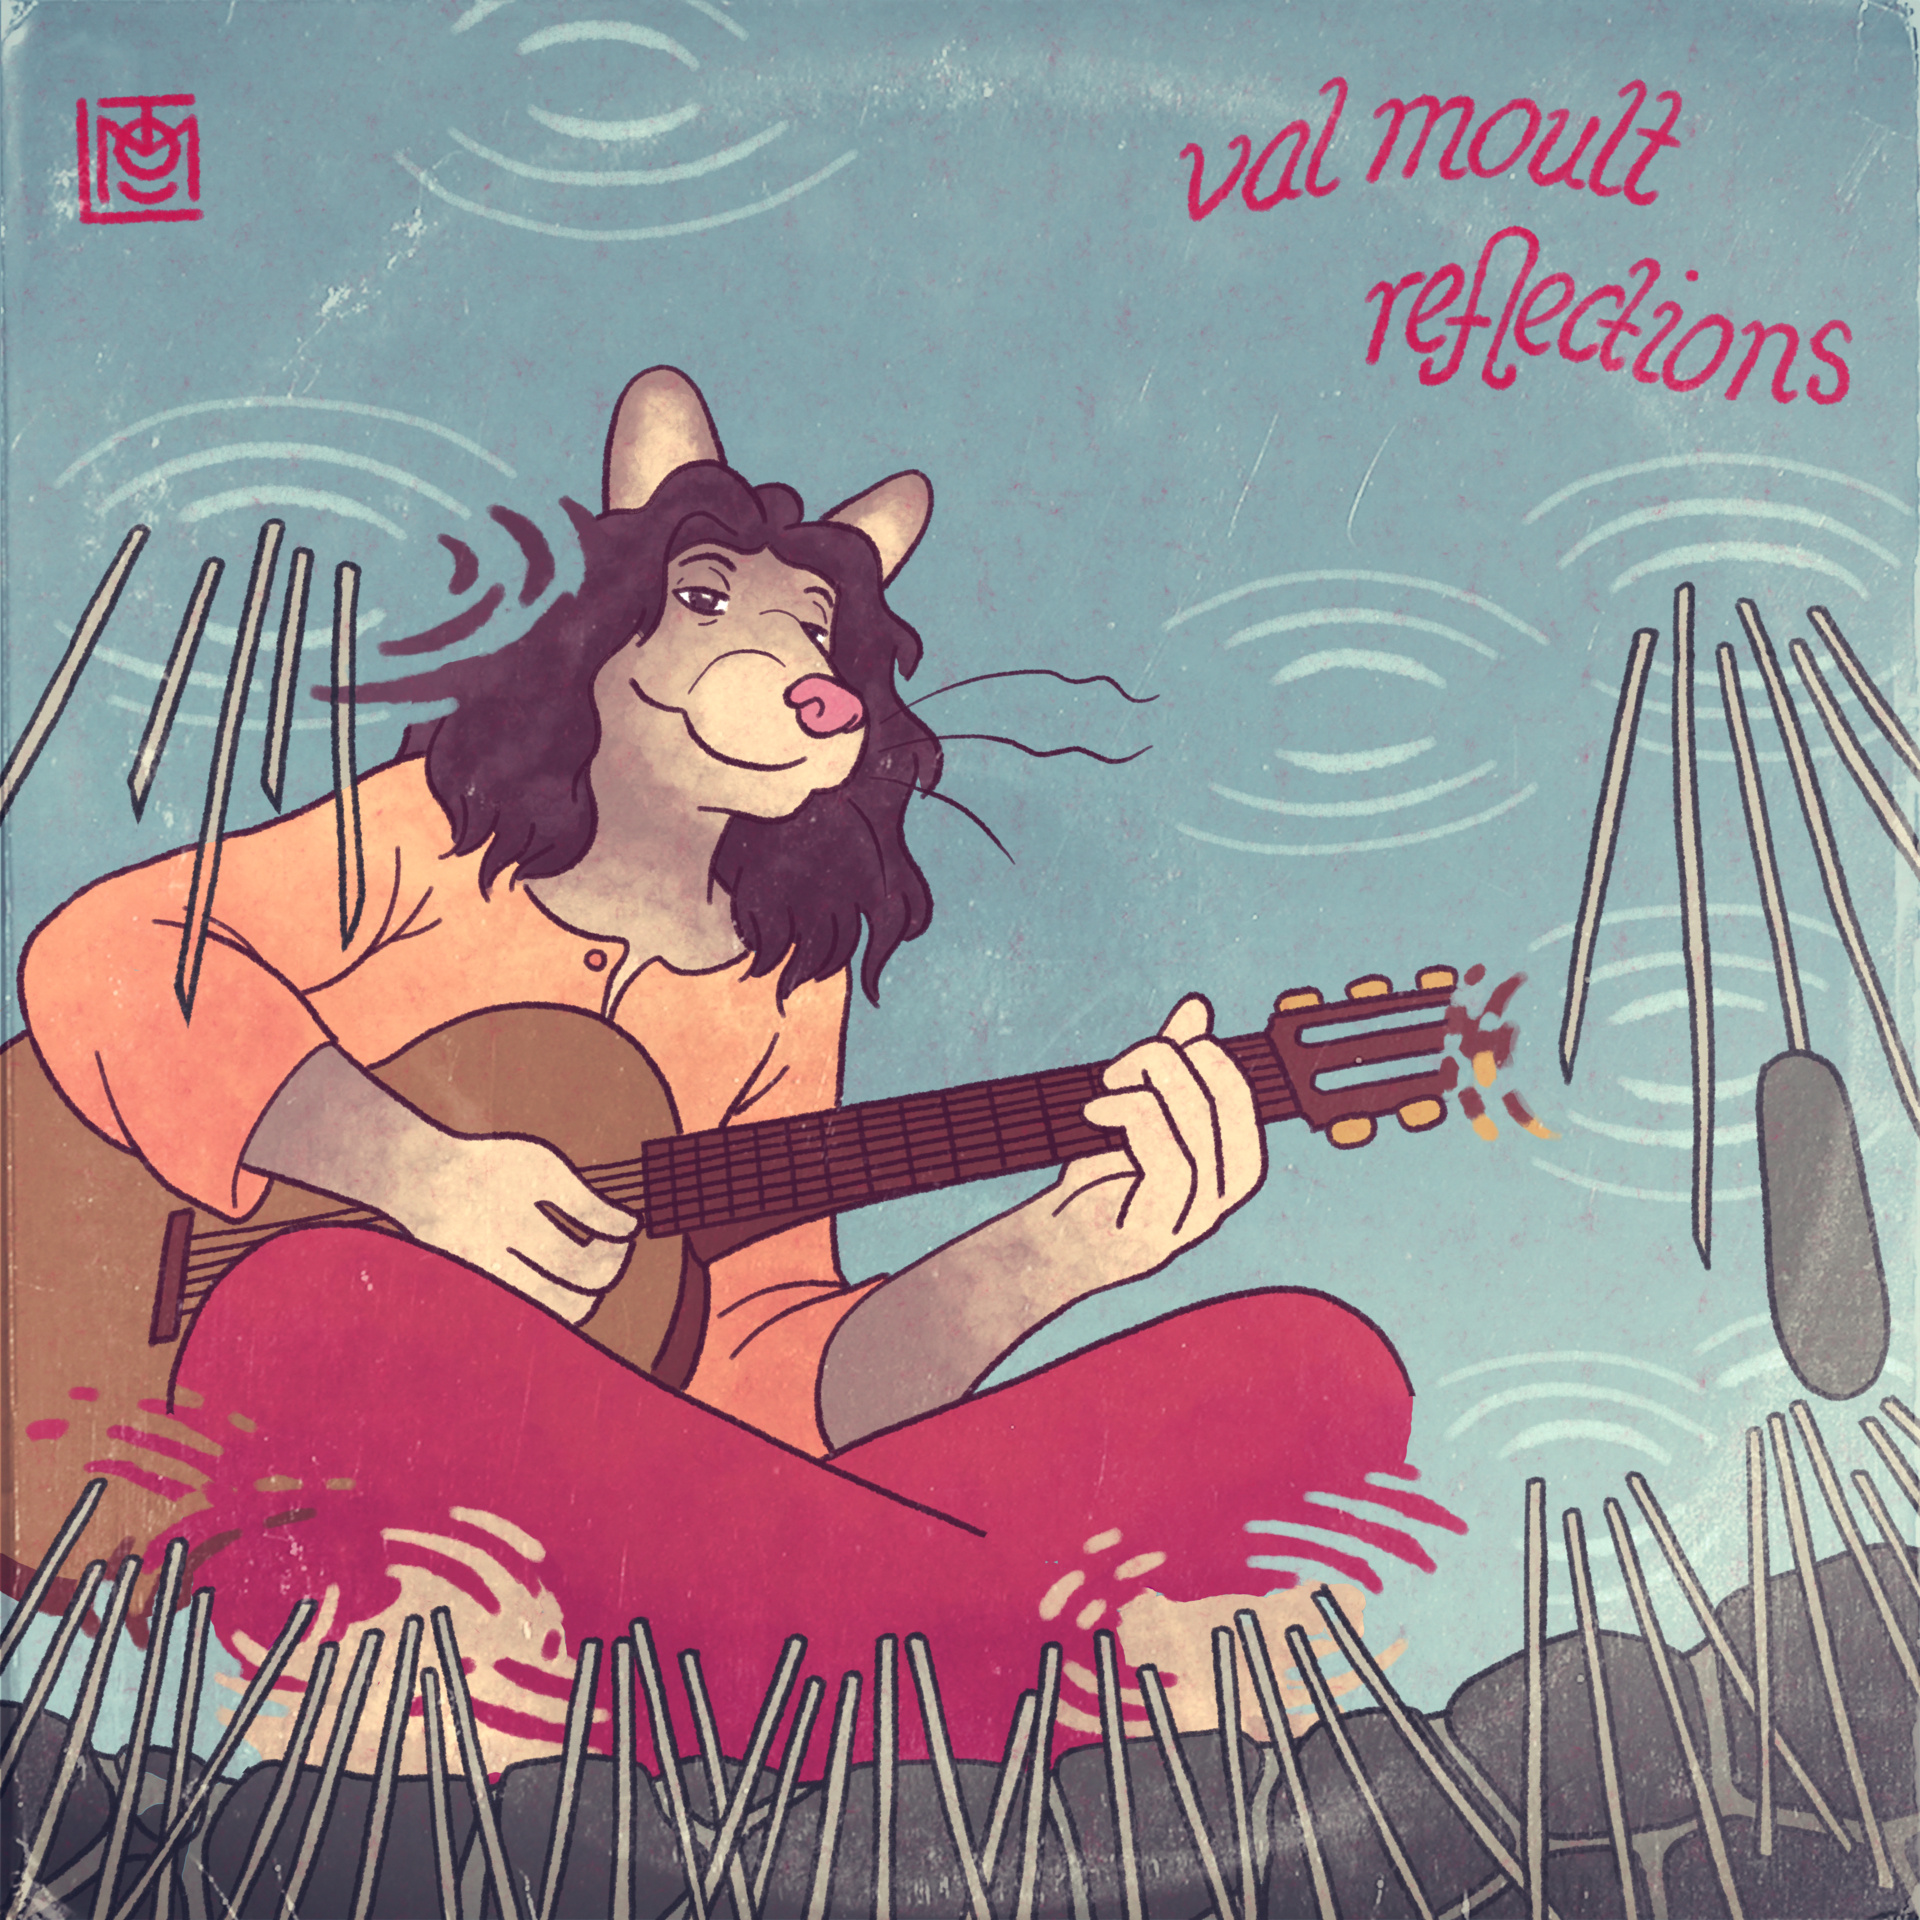 a faux album cover for 'val moult's reflections' showing a long-haired anthropomorphic cat with an acoustic guitar as if photographed via the reflection in a pool. they look smug